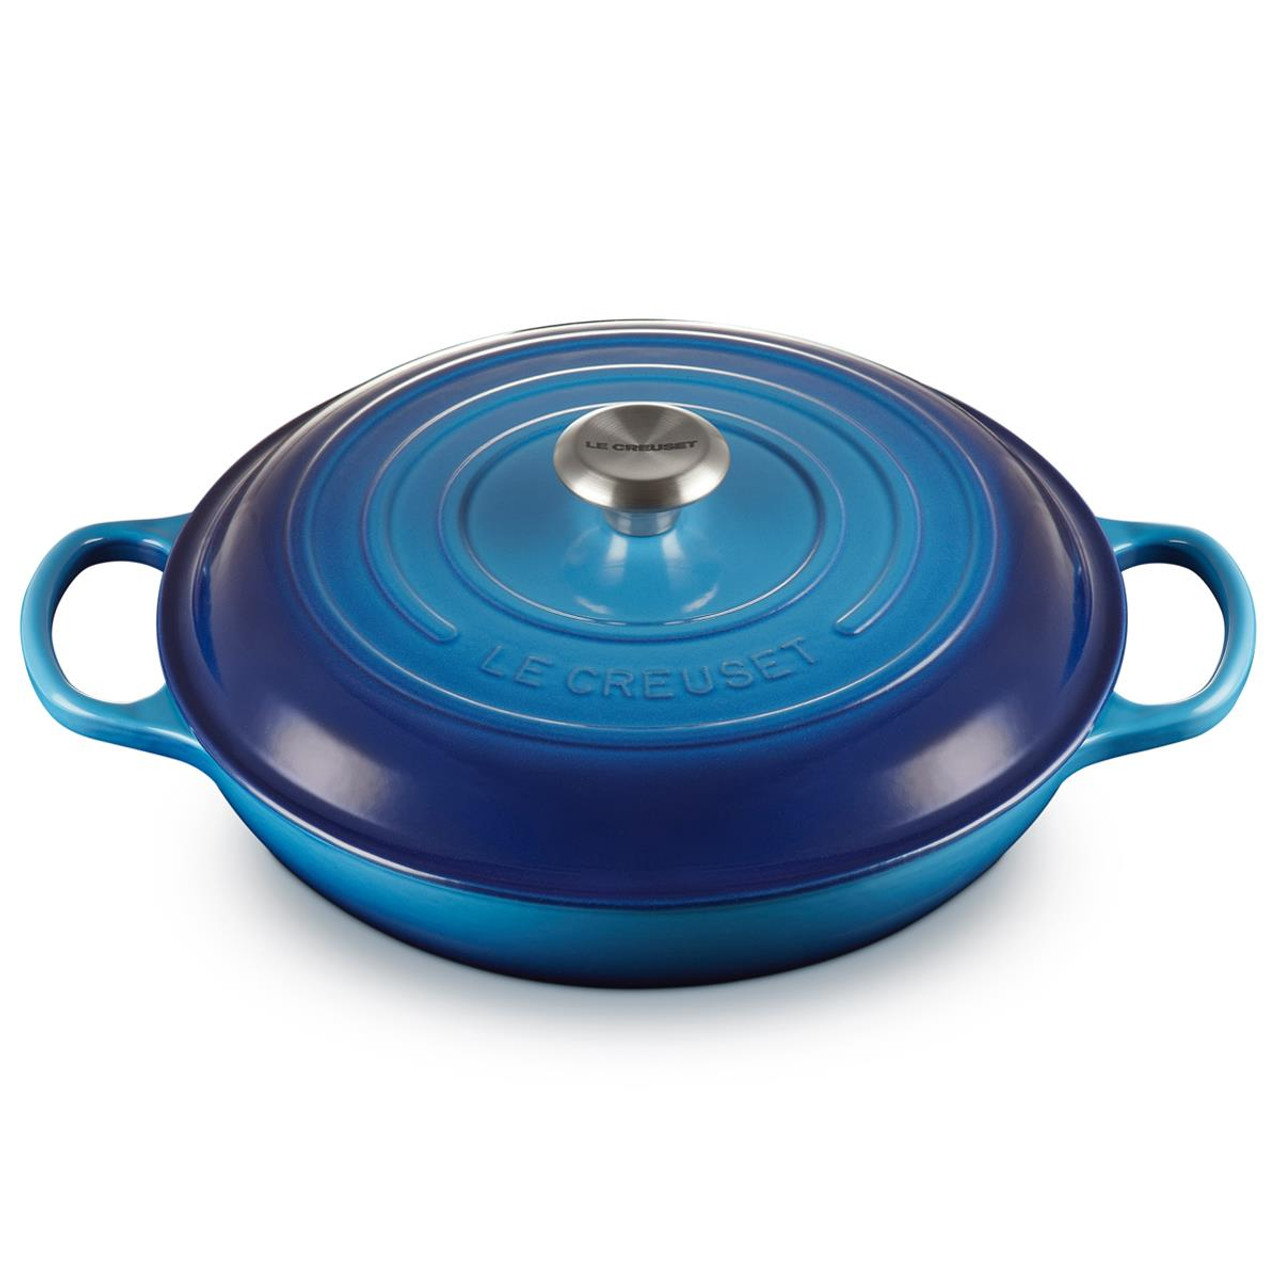 What can I use the le creuset shallow casserole for?